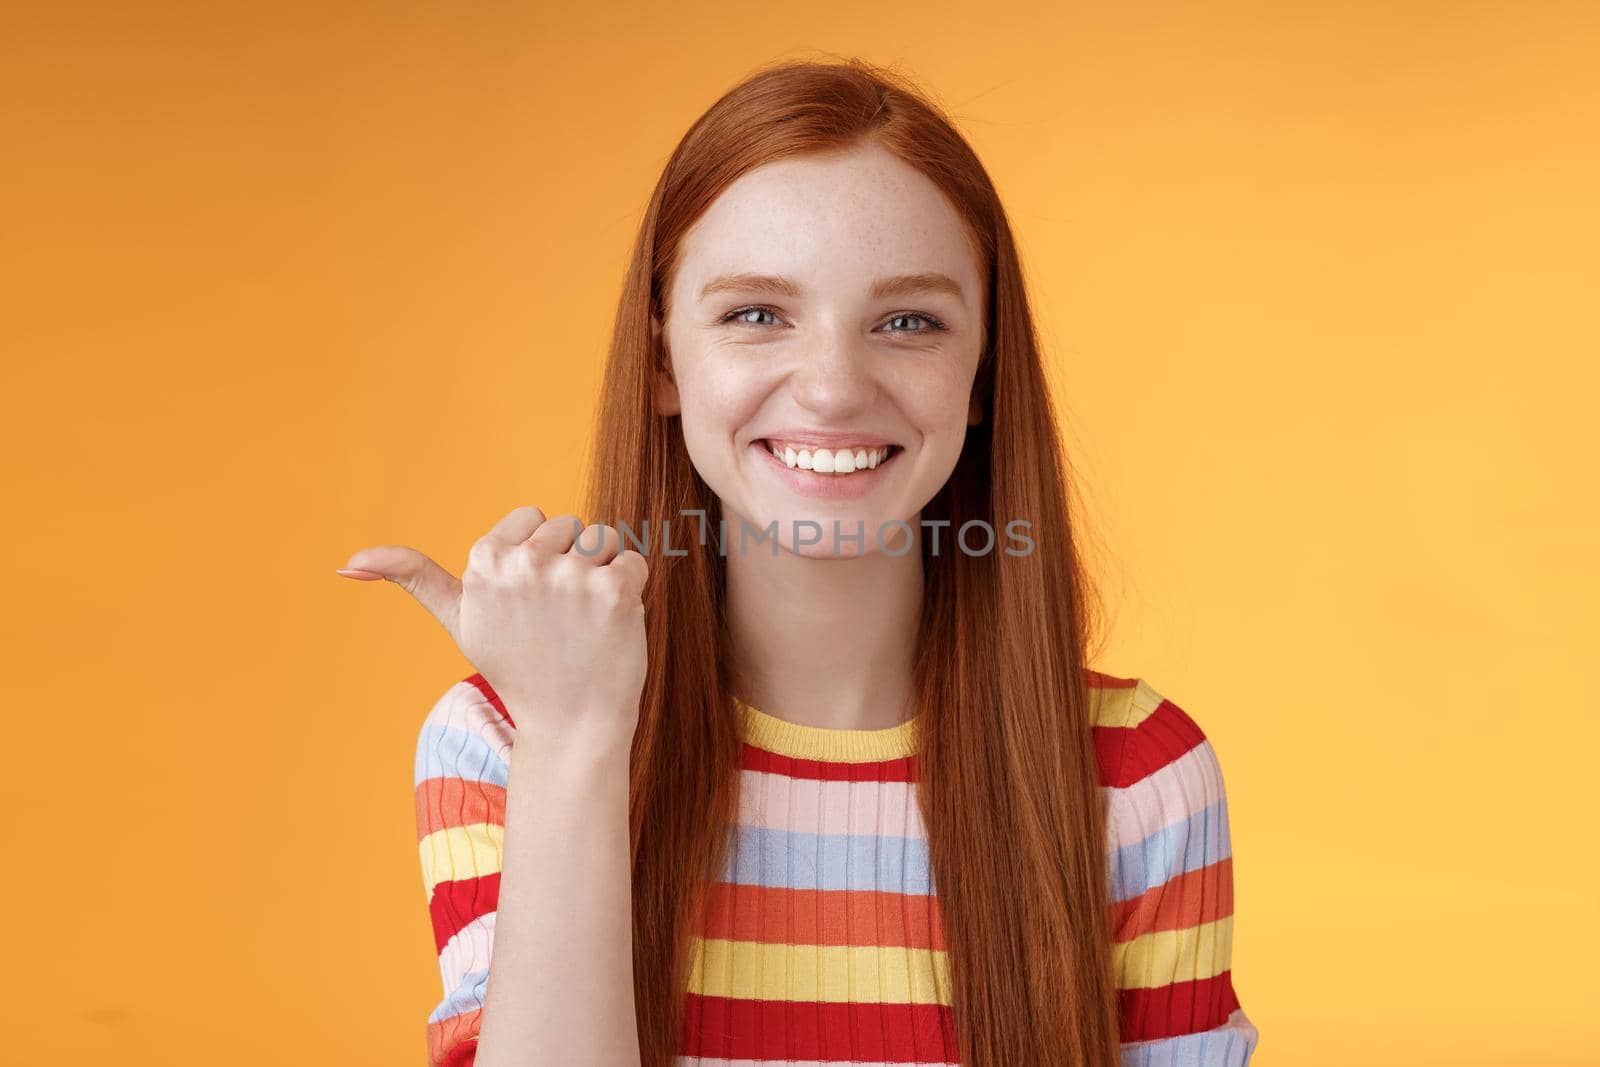 Girl pointing left cool person can help smiling delighted look friendly camera discuss interesting project introduce friend during conversation standing happy grinning orange background.